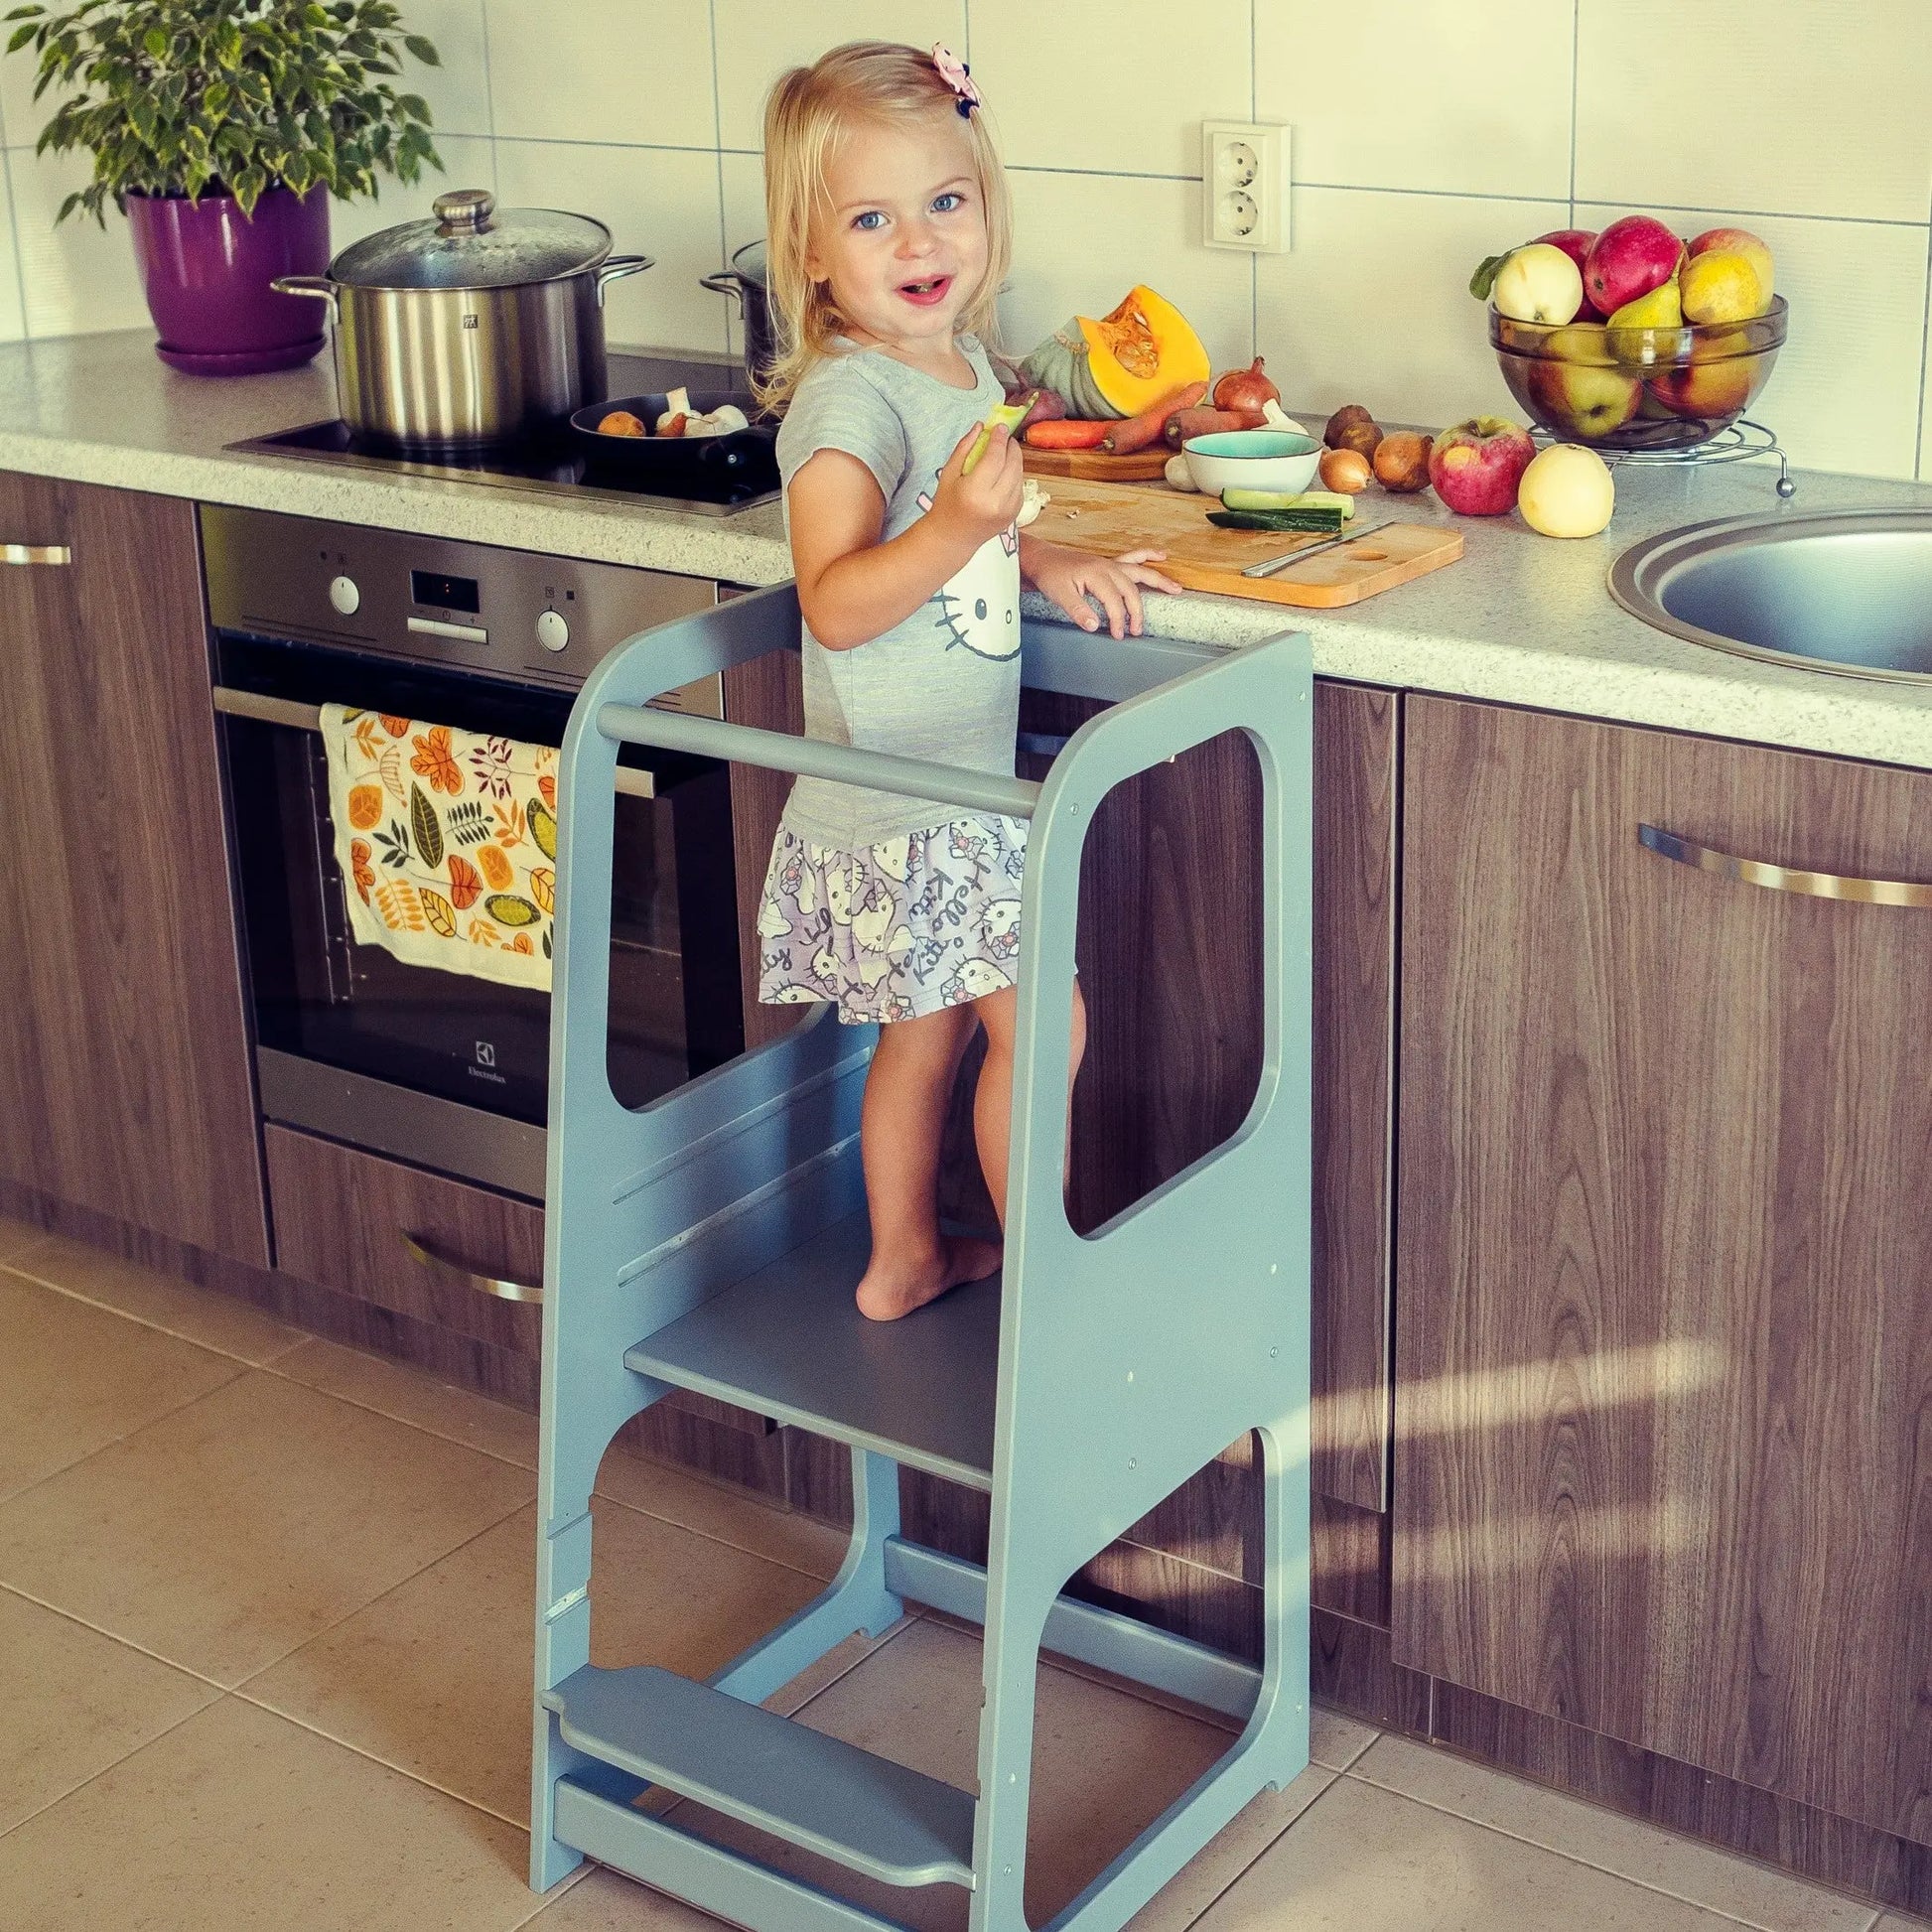 A child stands on a Montessori Helper Tower Step Stool in a kitchen, promoting independence and safe interaction. Handmade from Baltic birch plywood, height-adjustable for young learners.